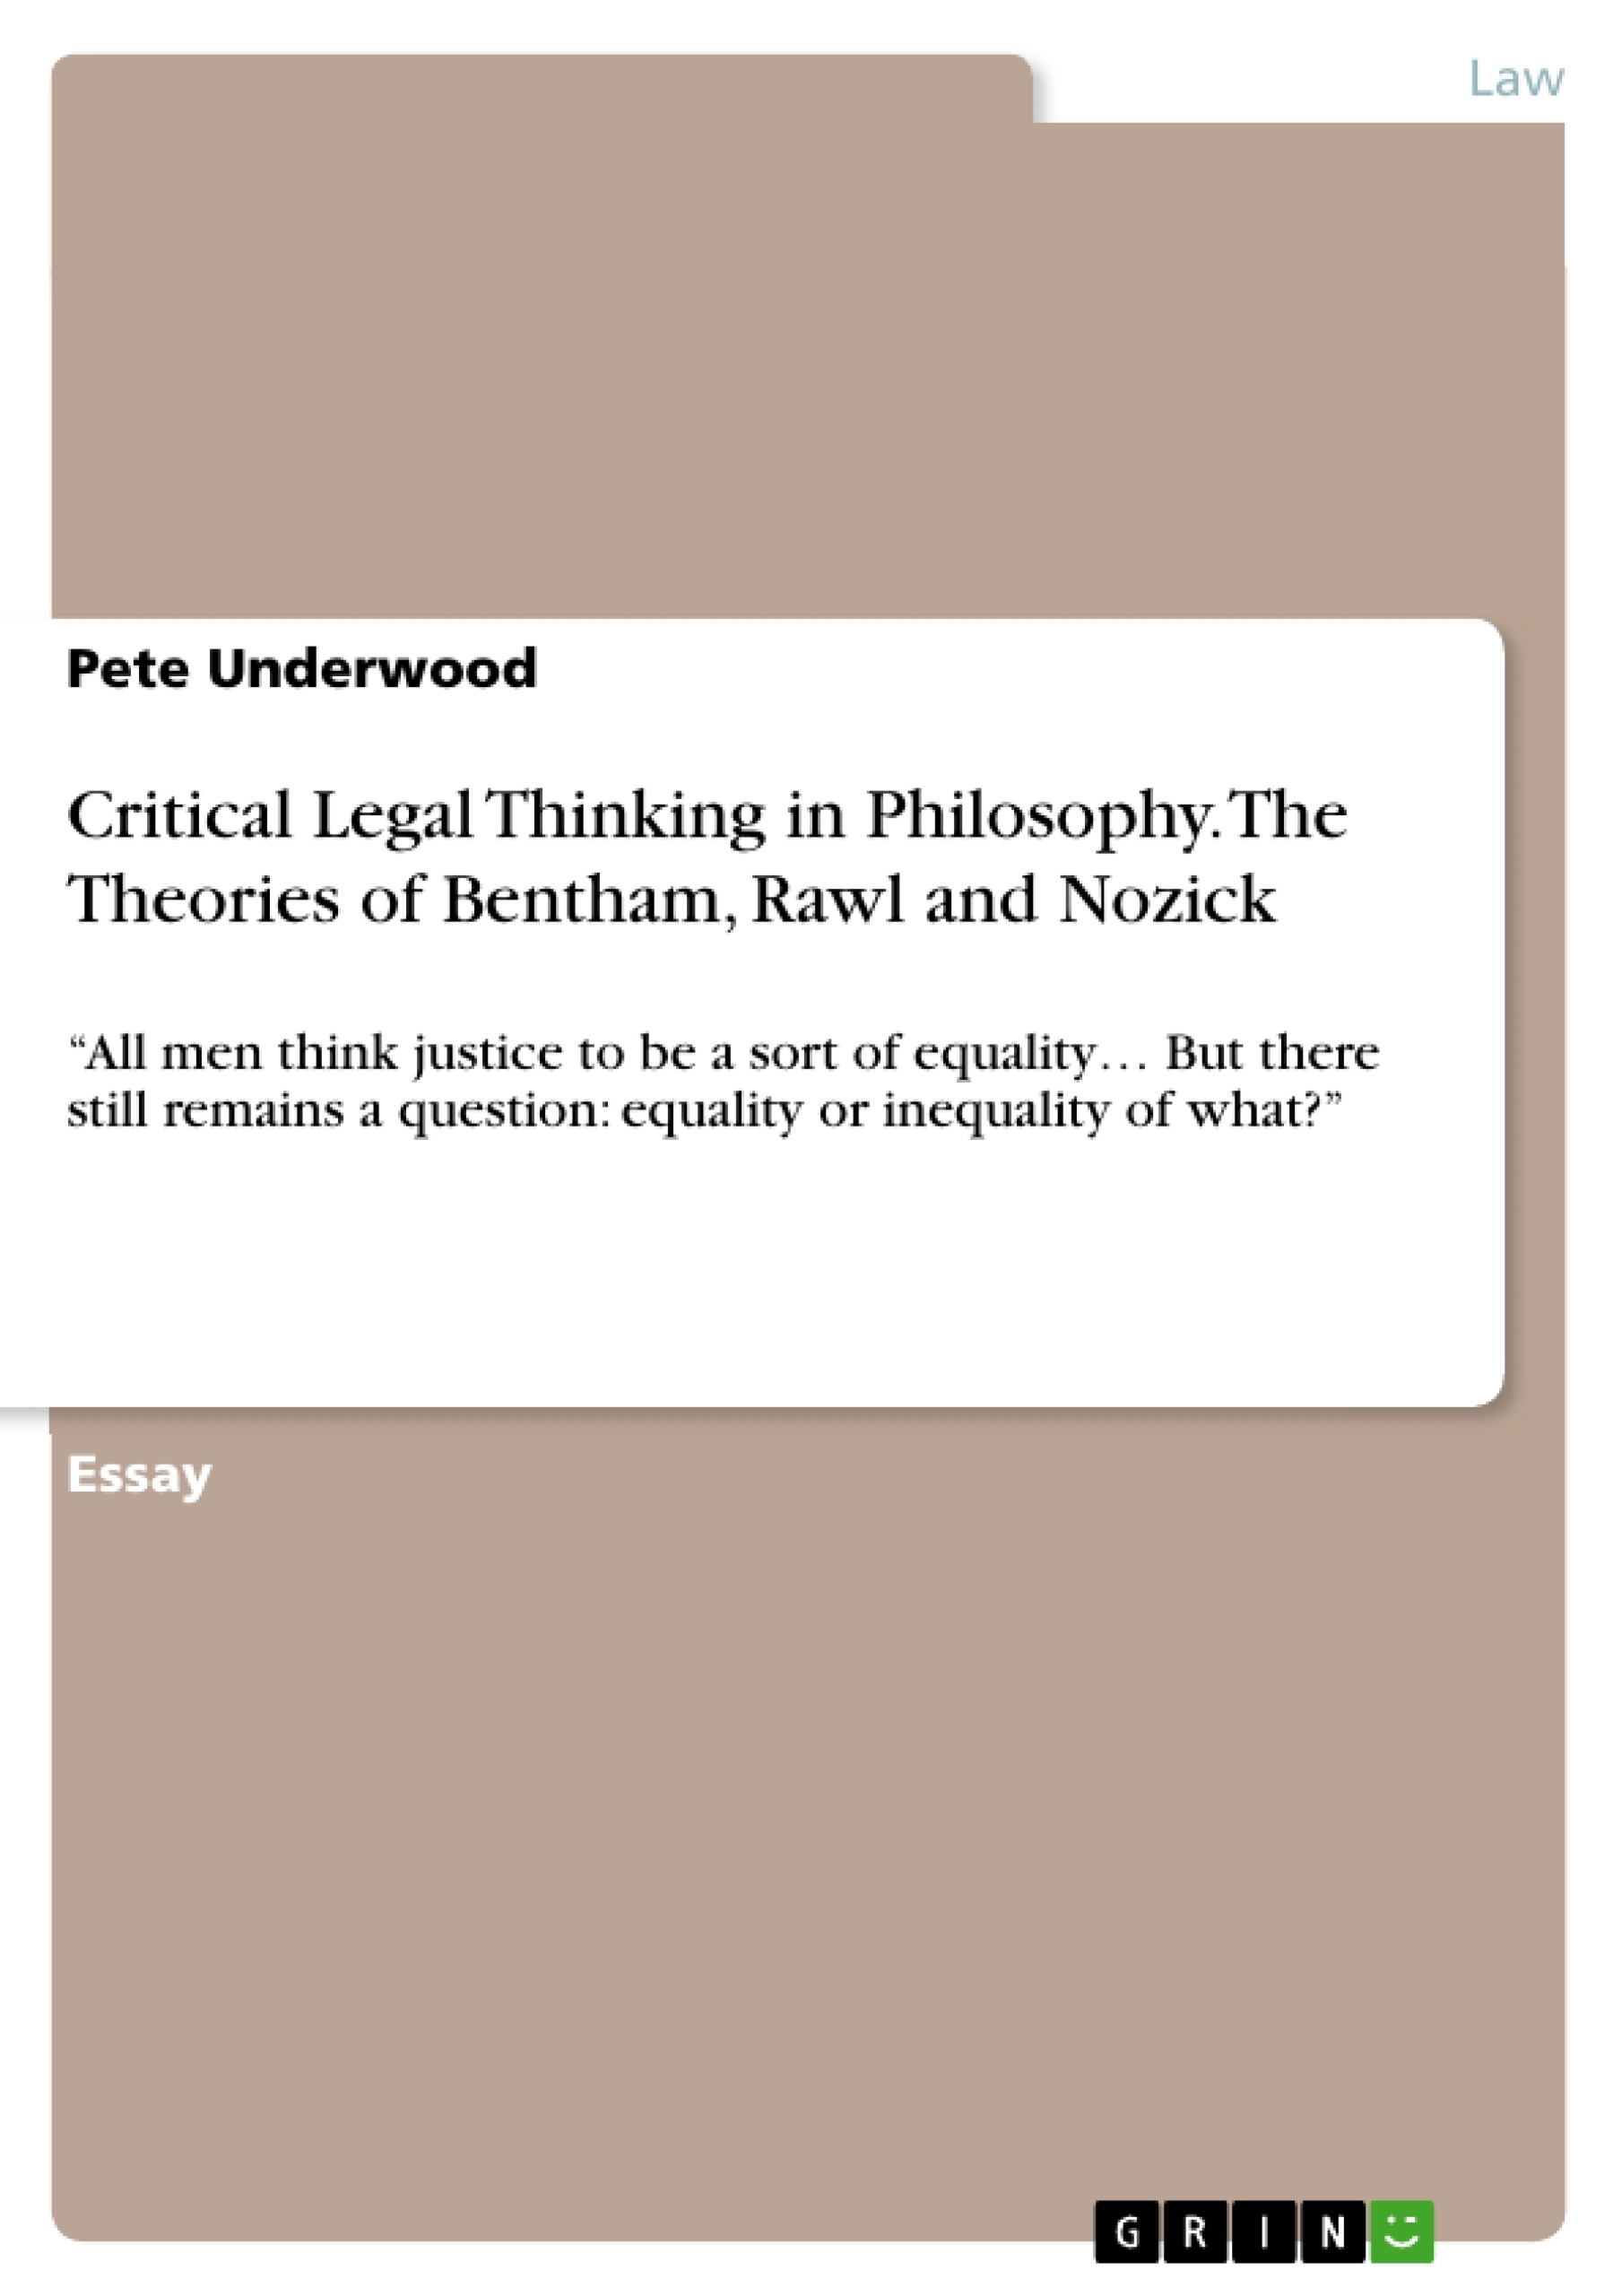 Titre: Critical Legal Thinking in Philosophy. The Theories of Bentham, Rawl and Nozick